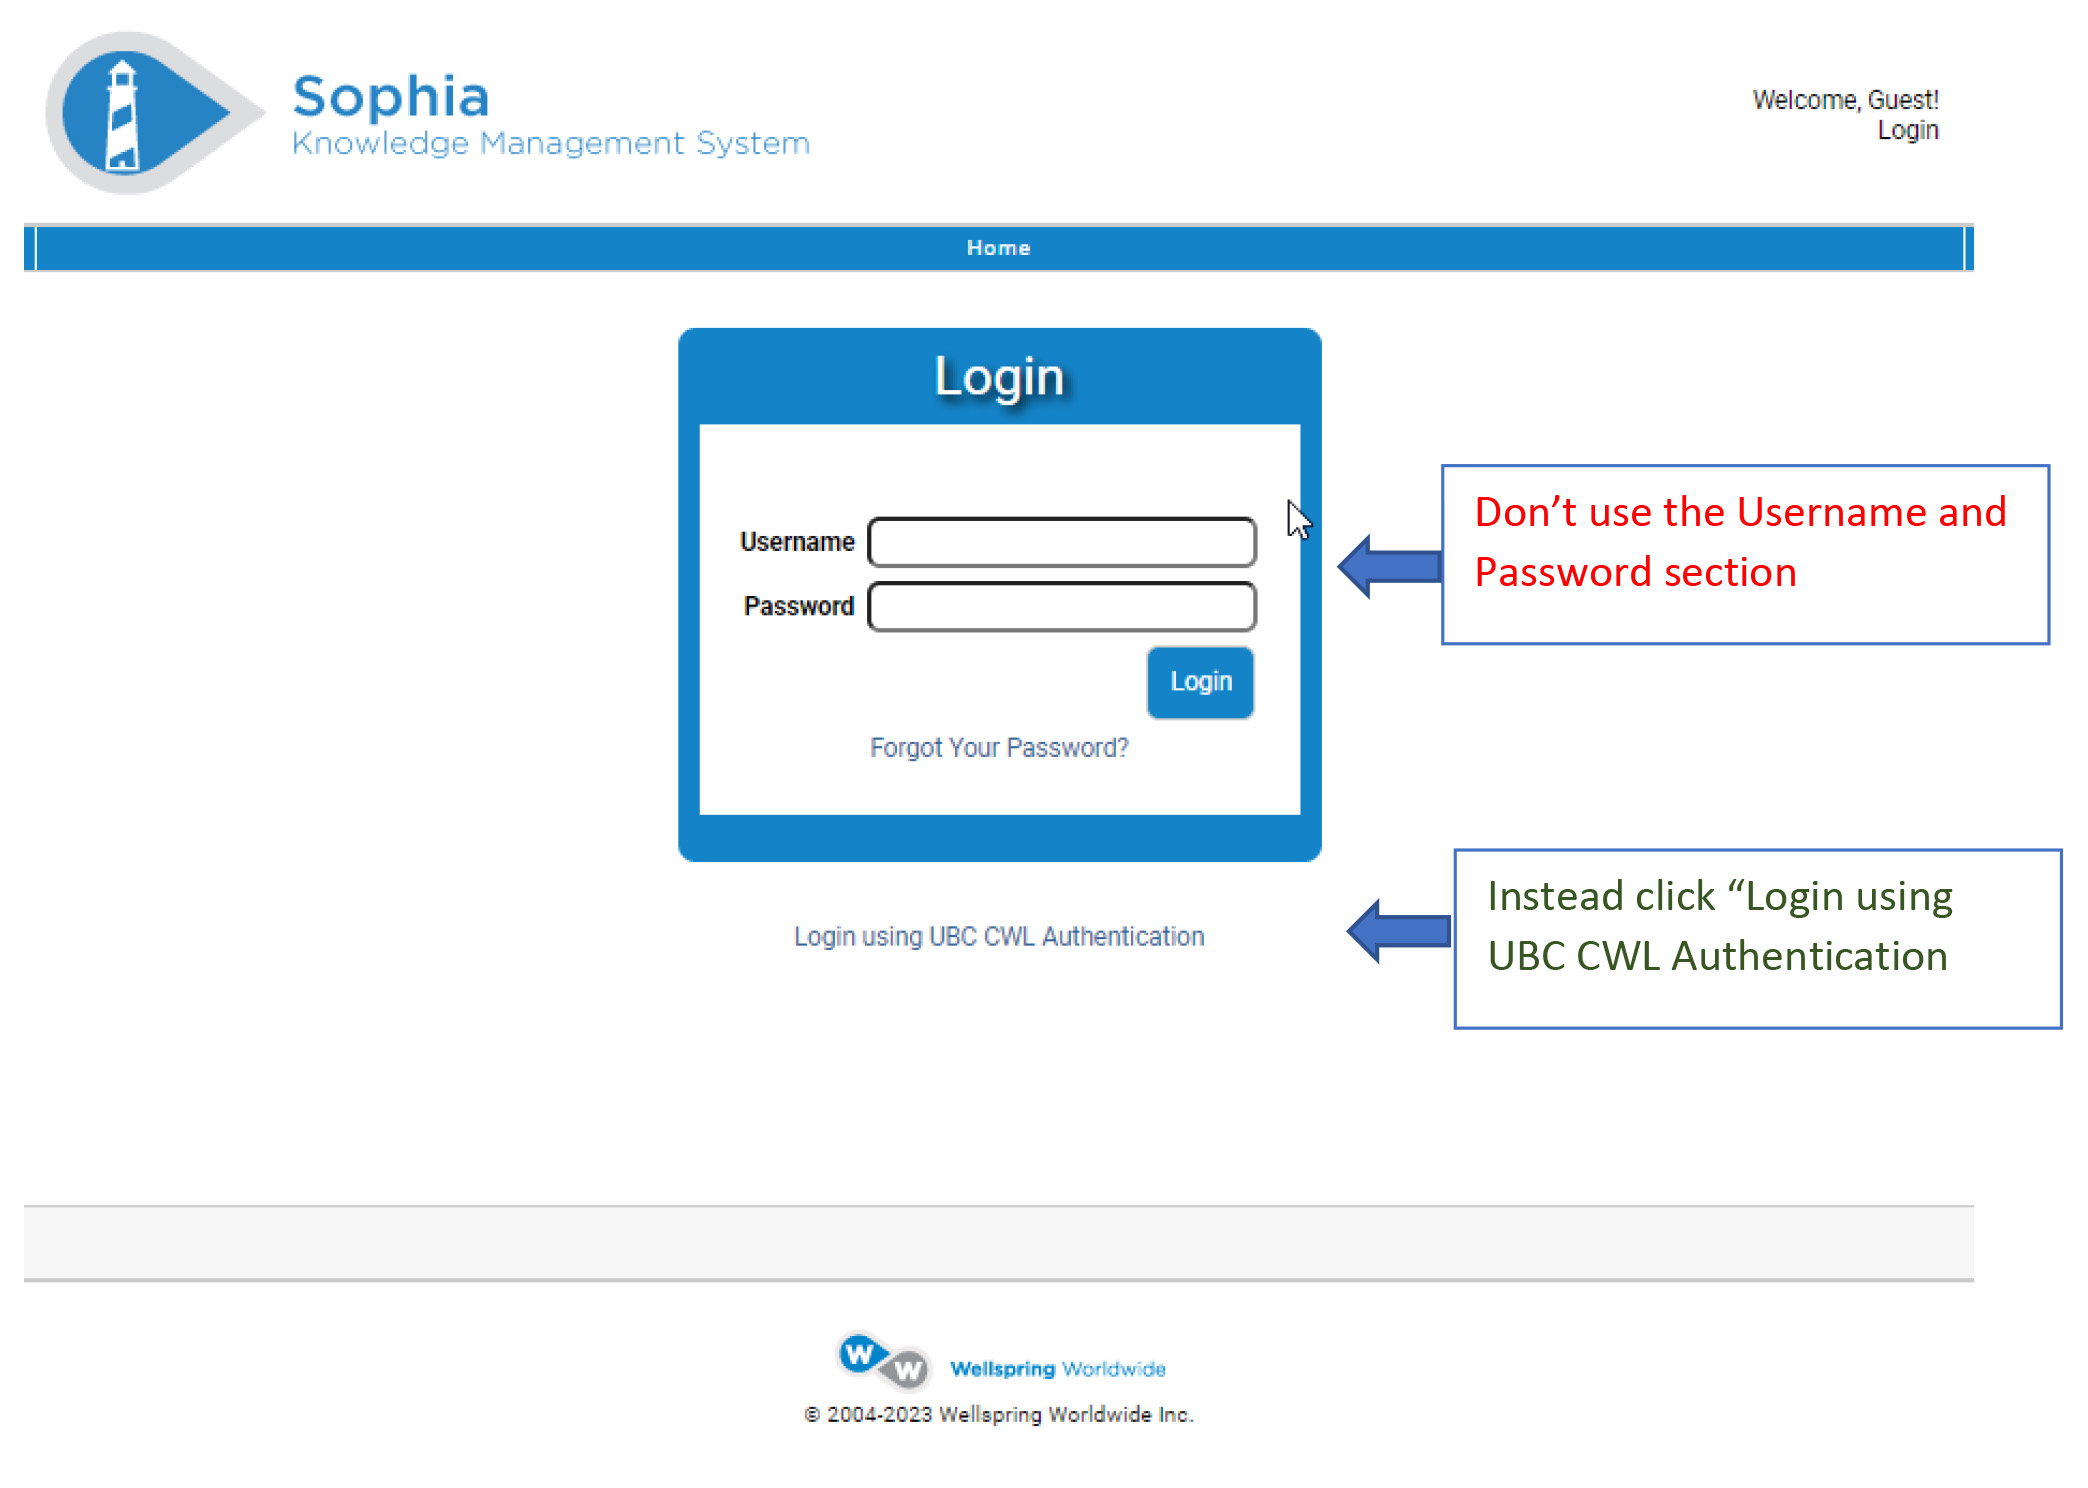 login page - click to use UBC CWL Authentication